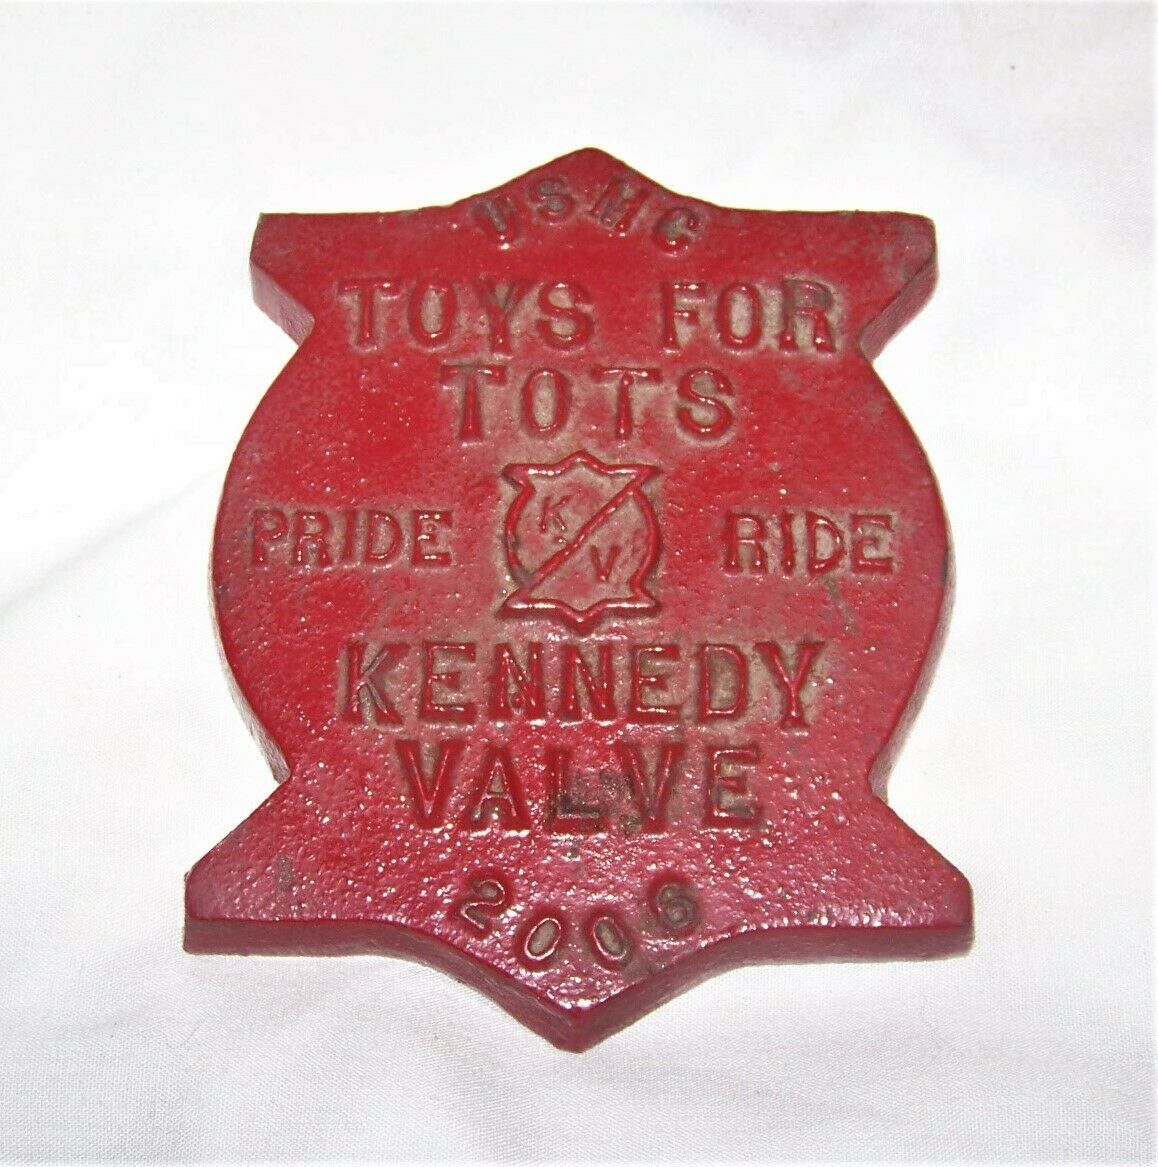 Primary image for 2000 USMC TOYS FOR TOTS PRIDE RIDE KENNEDY VALVE METAL PLAQUE SIGN MARINES